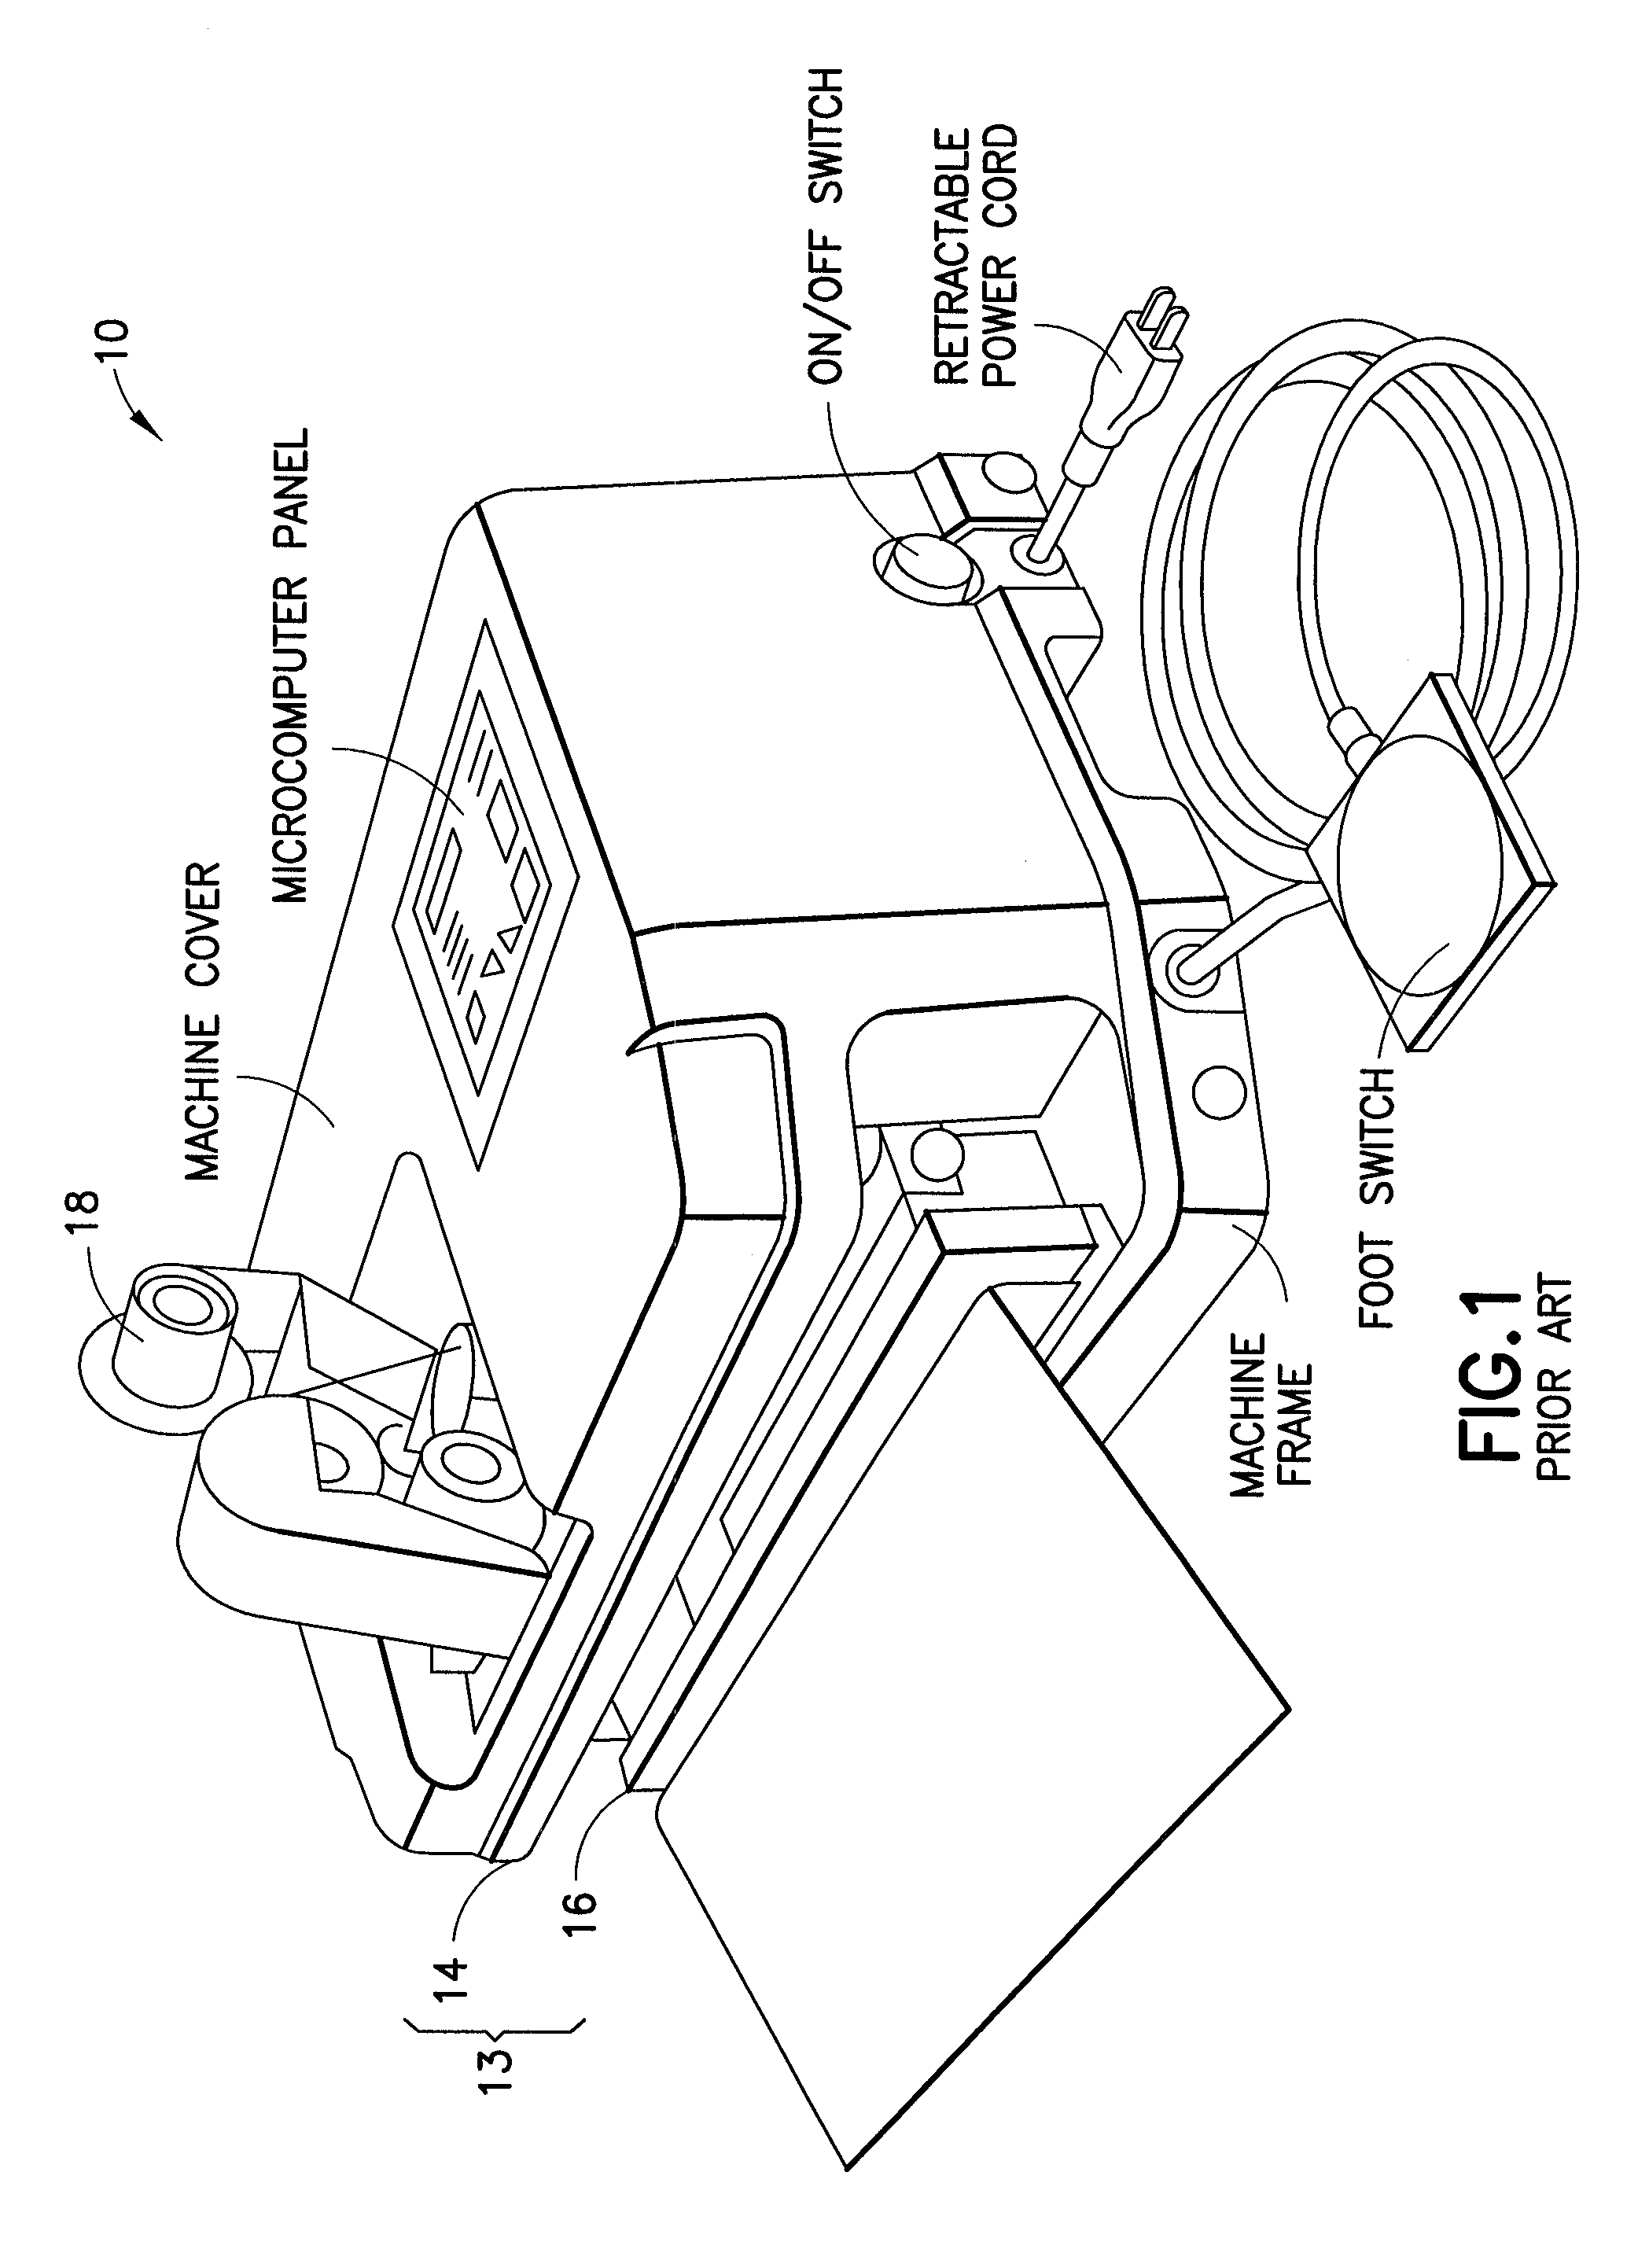 Method and device for inspecting and monitoring the seal integrity of sterile packages